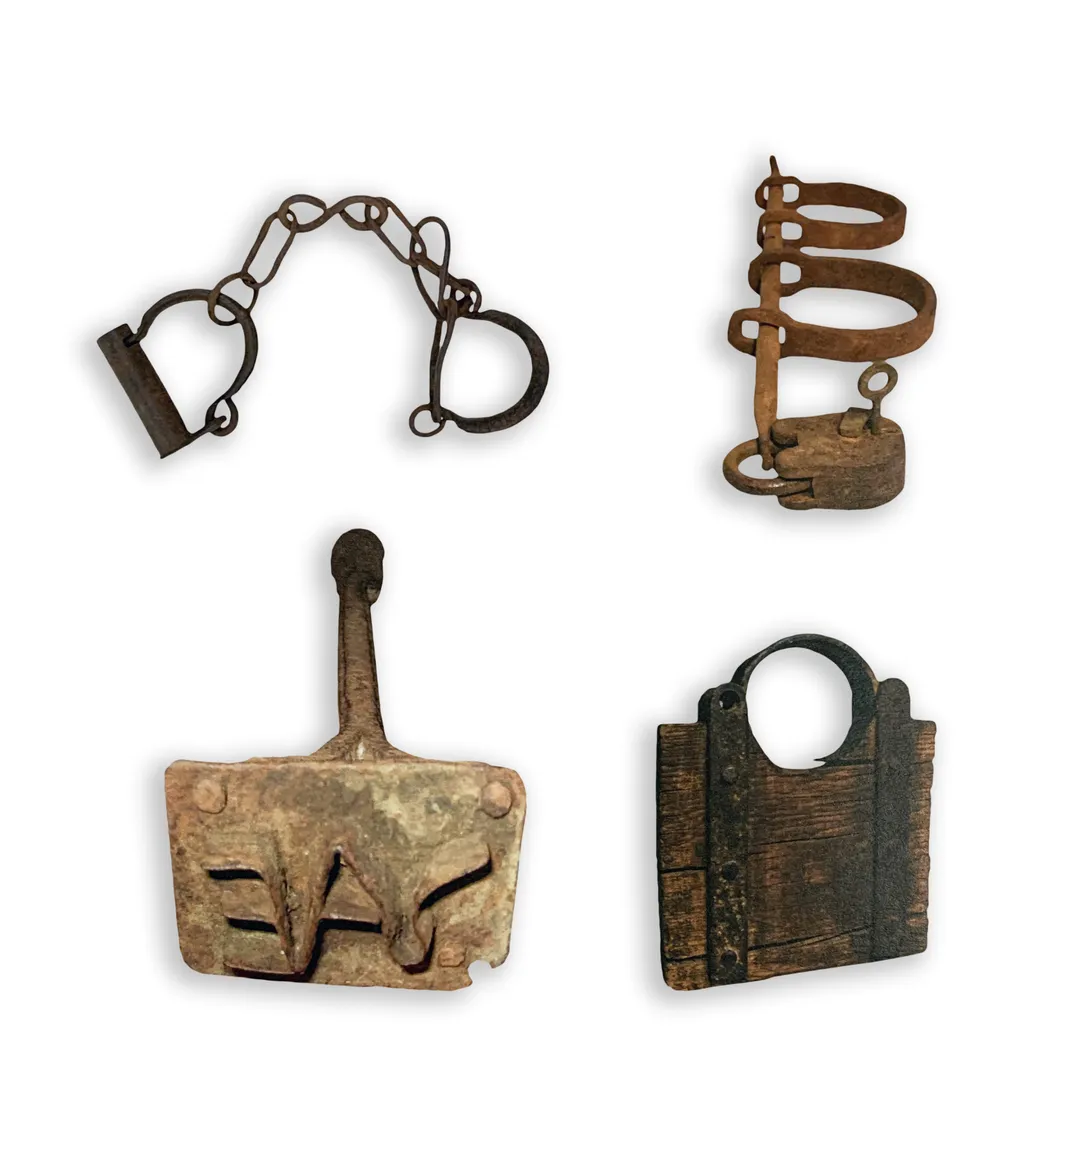 Artifacts related to slavery